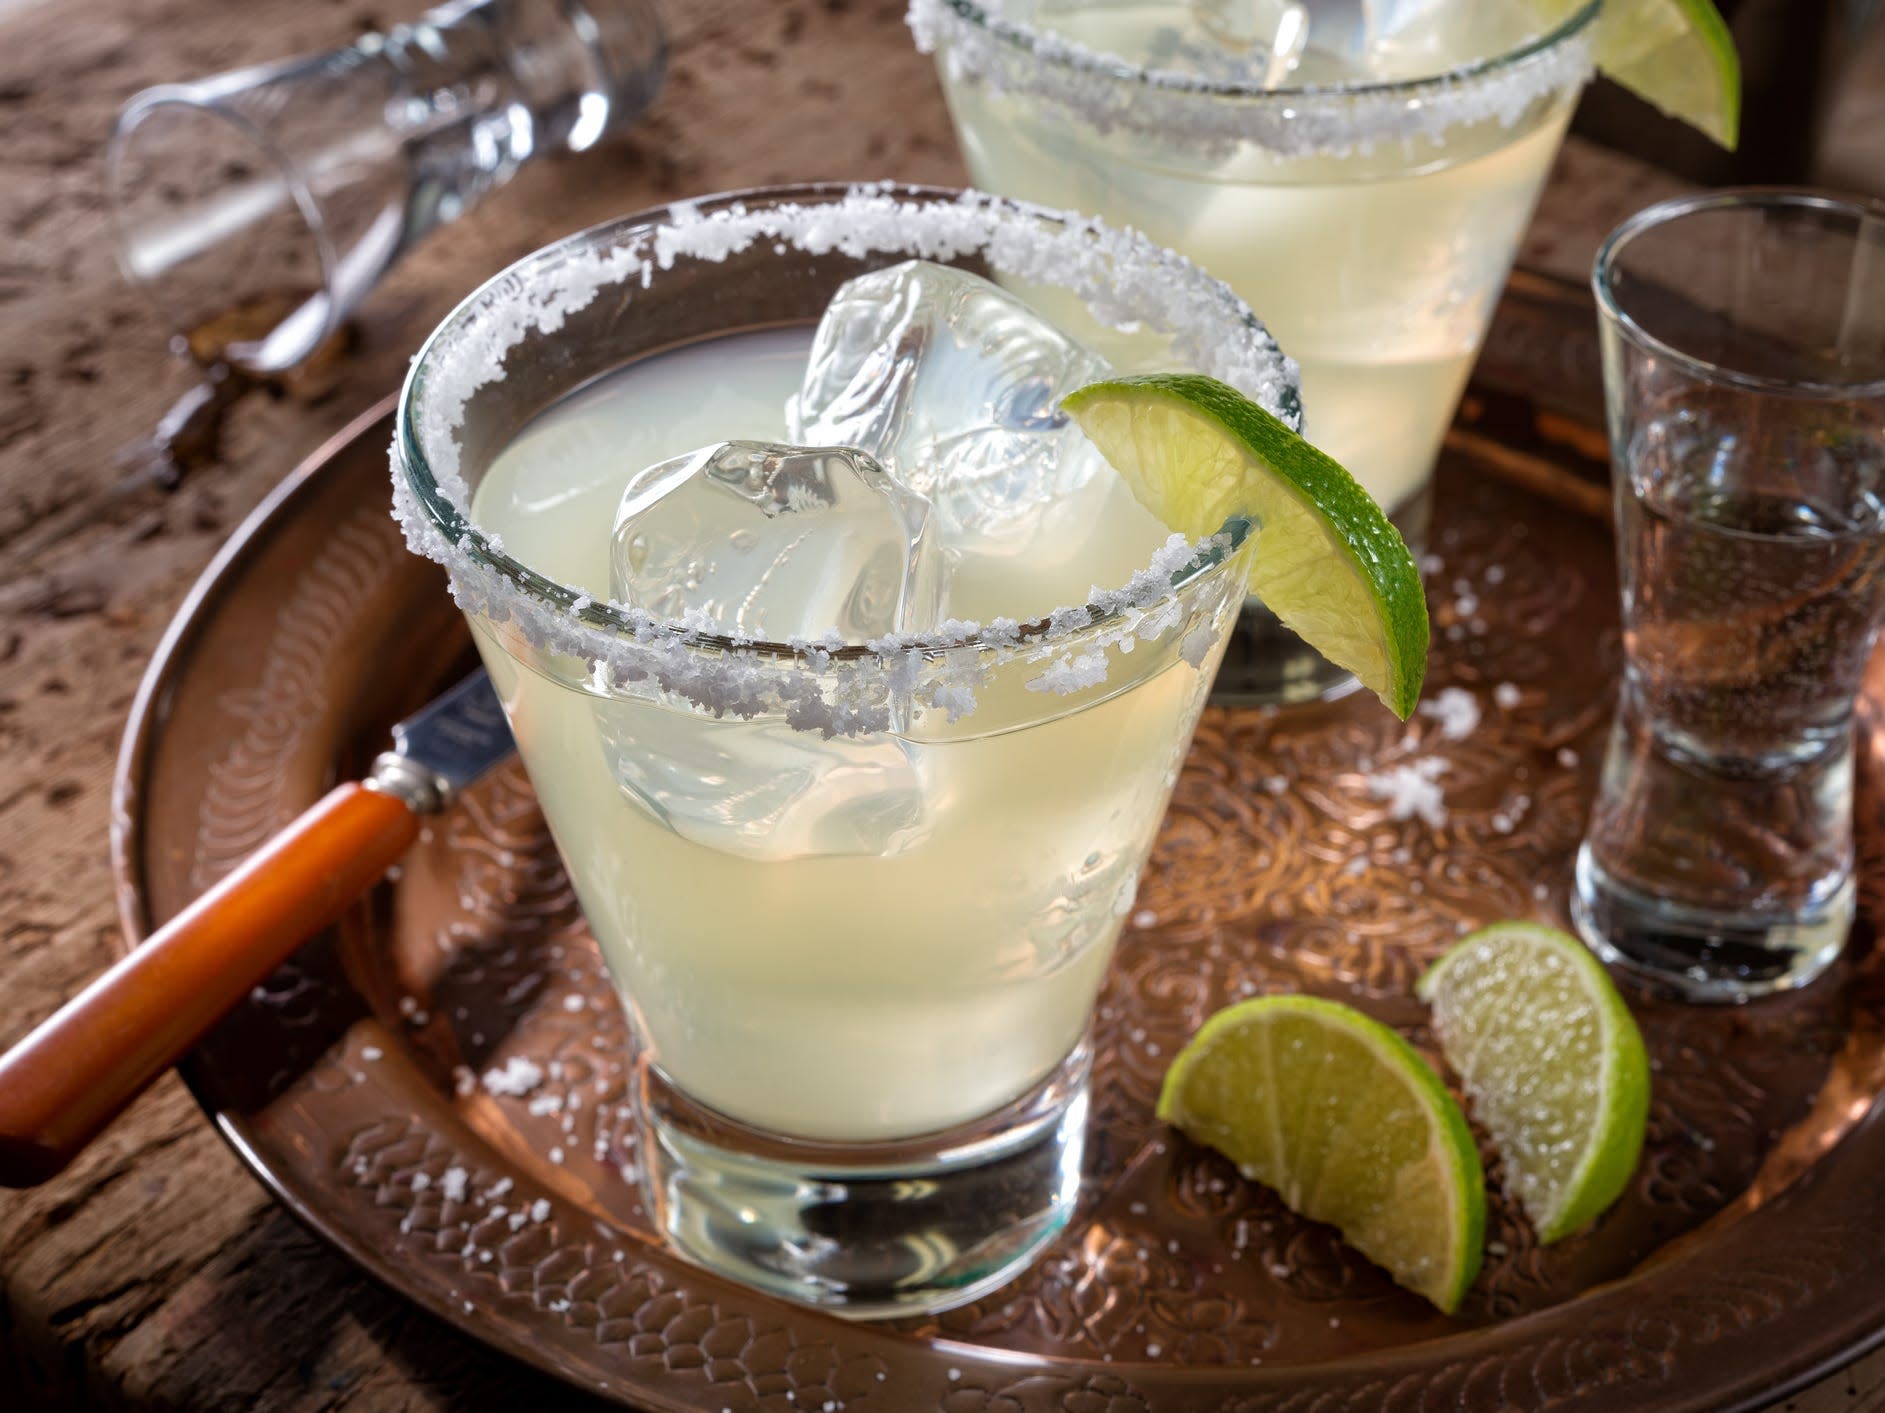 A class of kindergartners accidentally drank tequila during snack time at a Michigan school